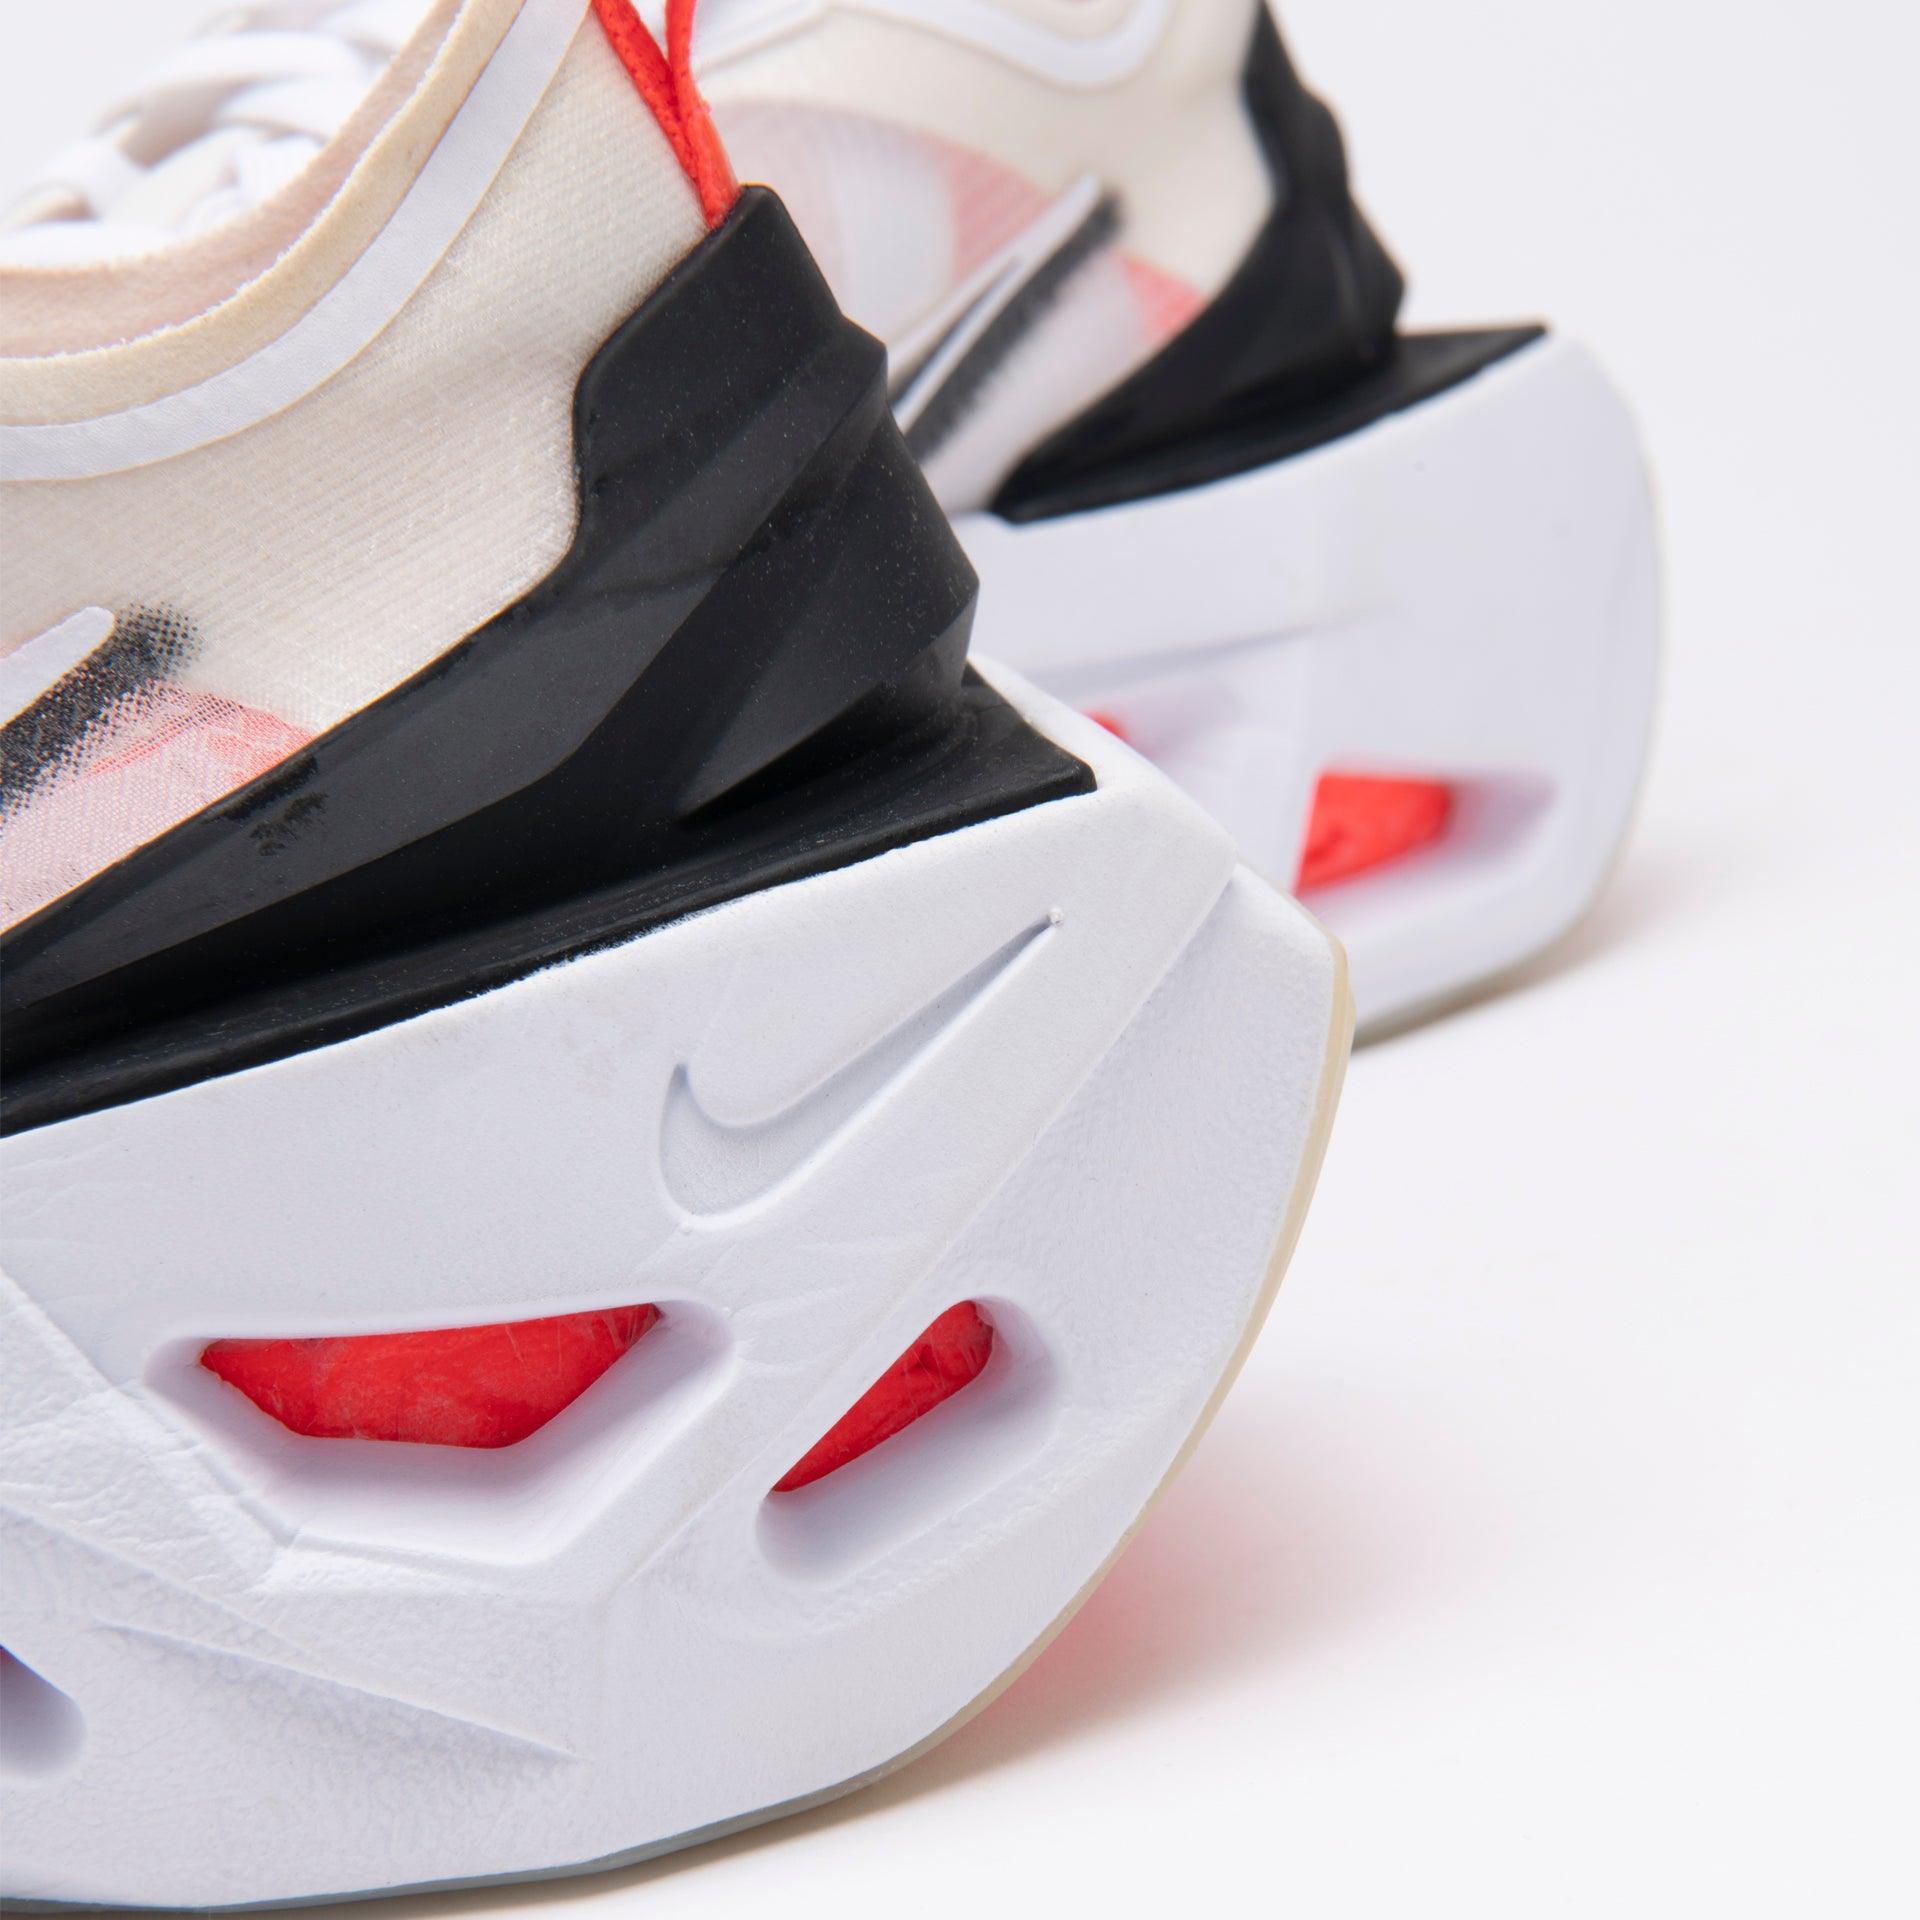 Zoom X Vista Grind Sneakers From Nike - WECRE8